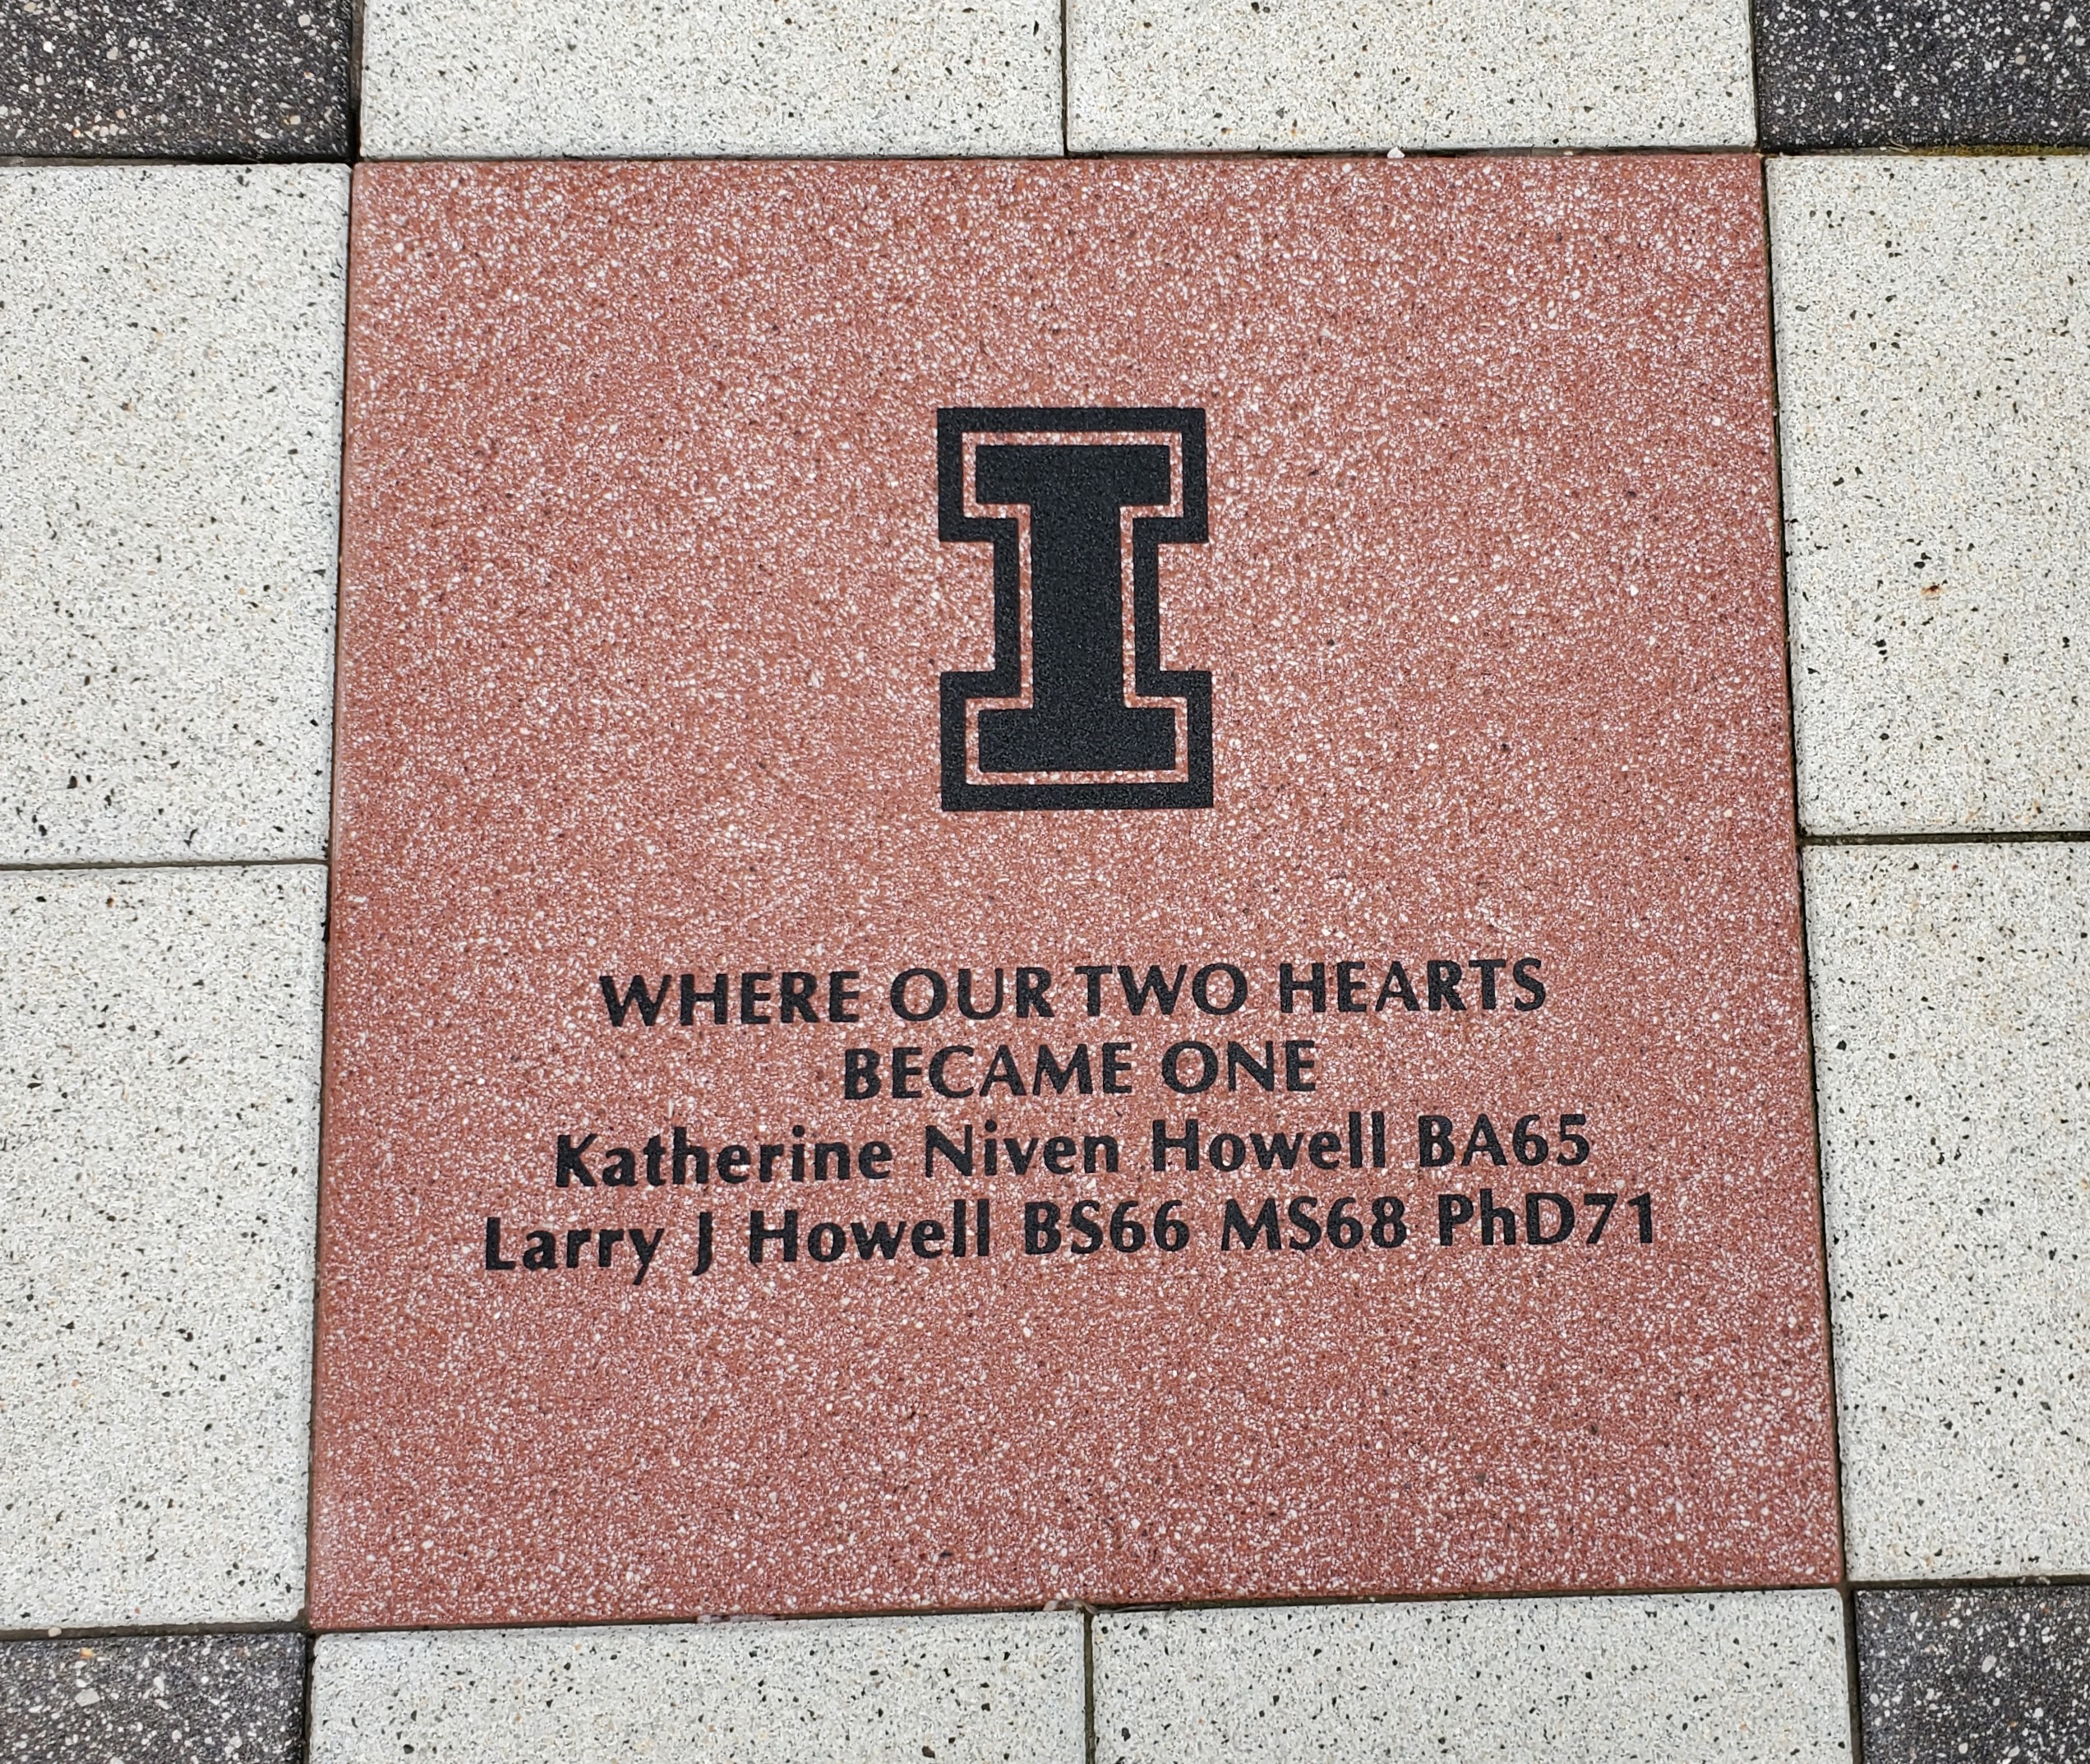 Paving stone on the patio at Alice Campbell Alumni Center